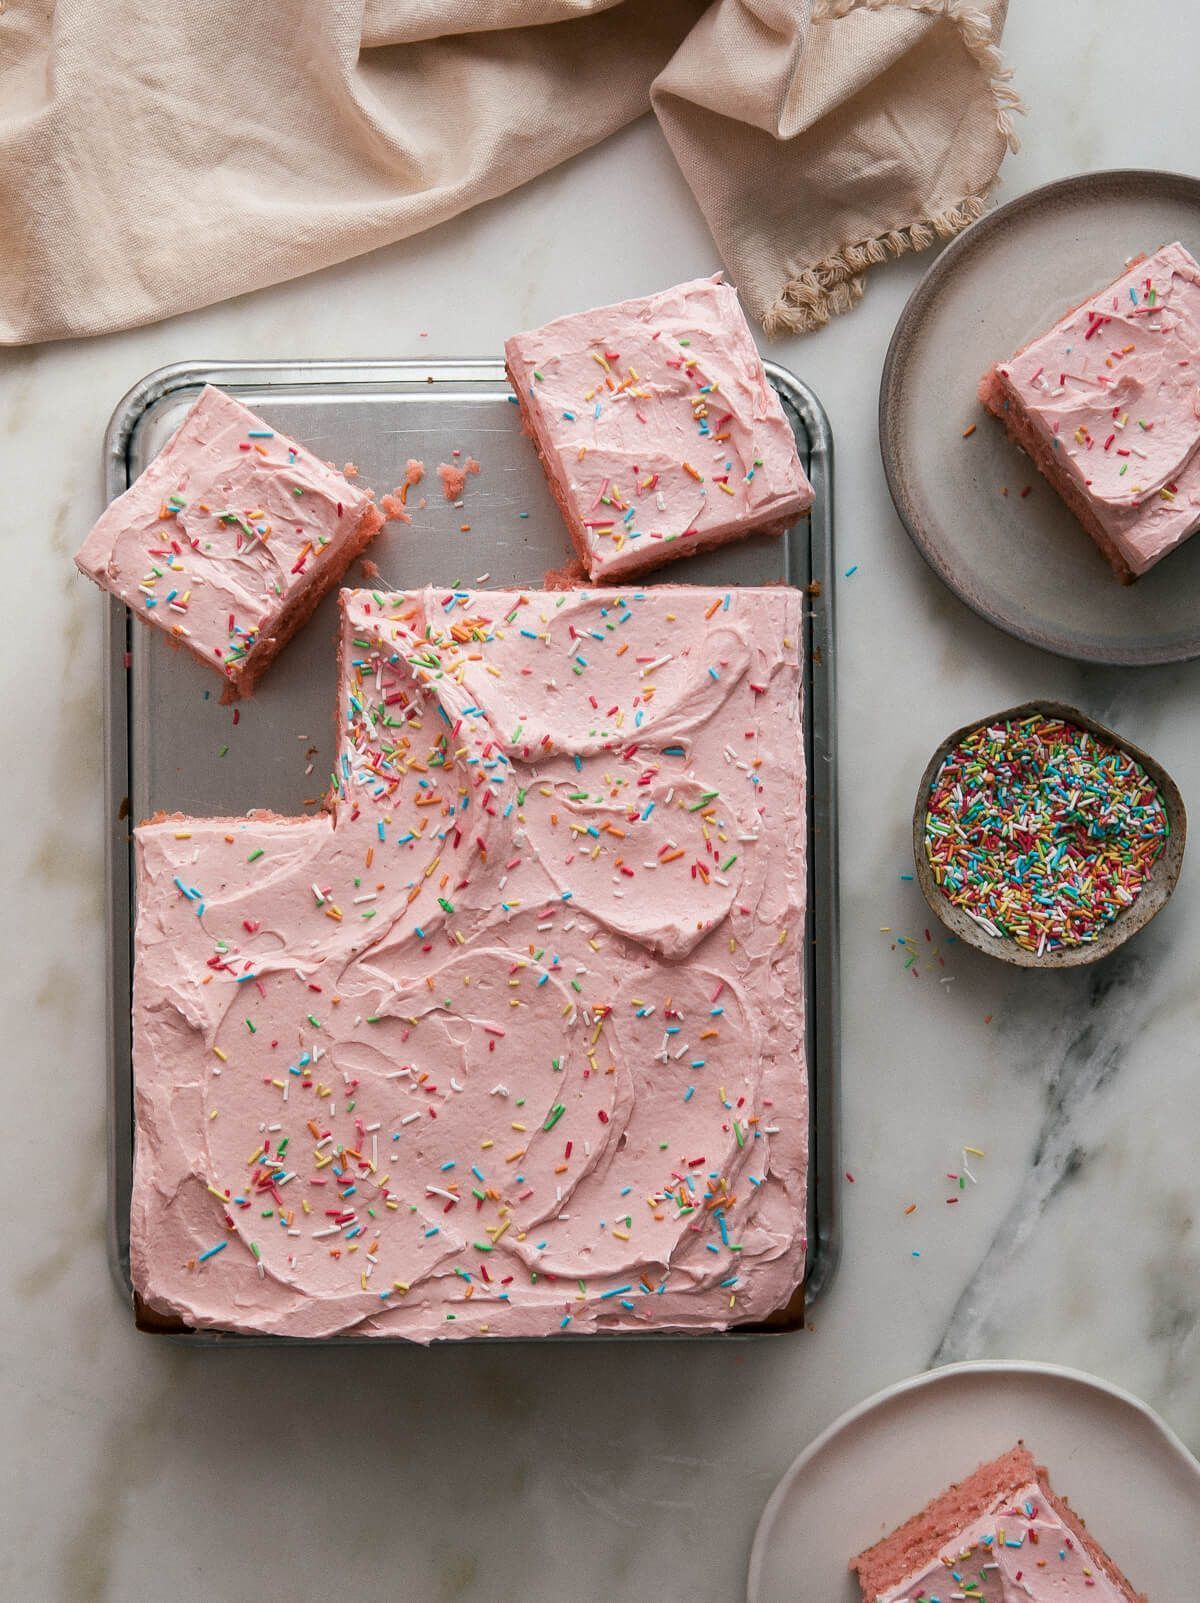 Strawberry Sheet Cake with Rhubarb Meringue Frosting – A Cozy Kitchen